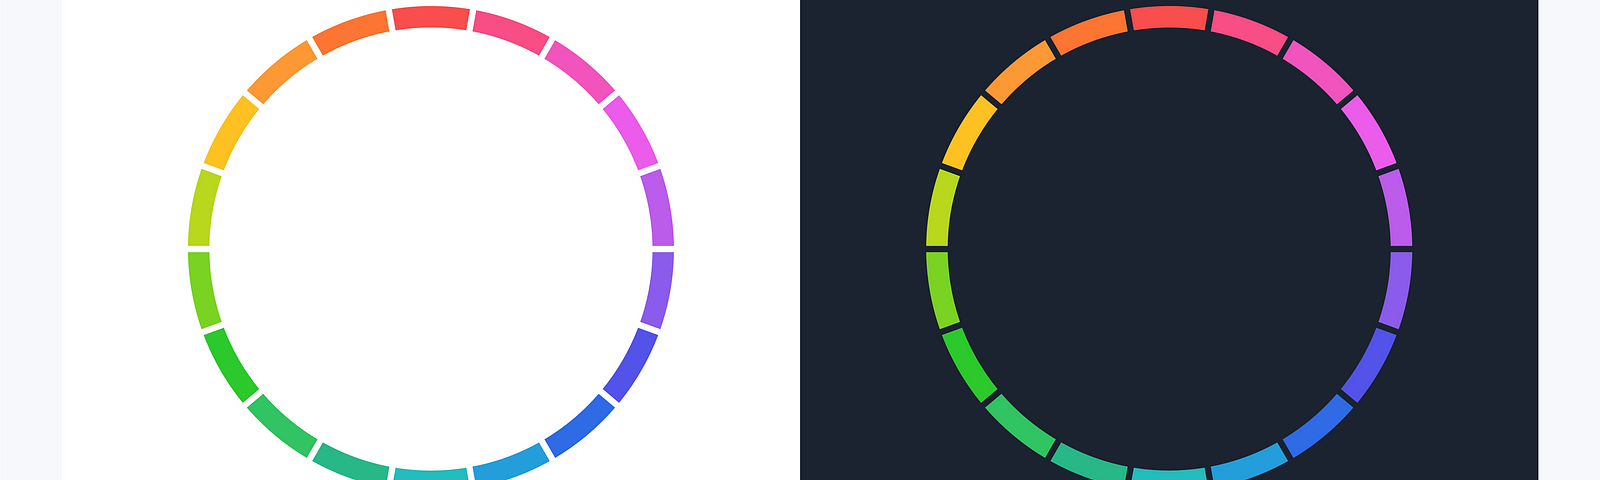 Two colour wheel spectrums on a white and dark background.